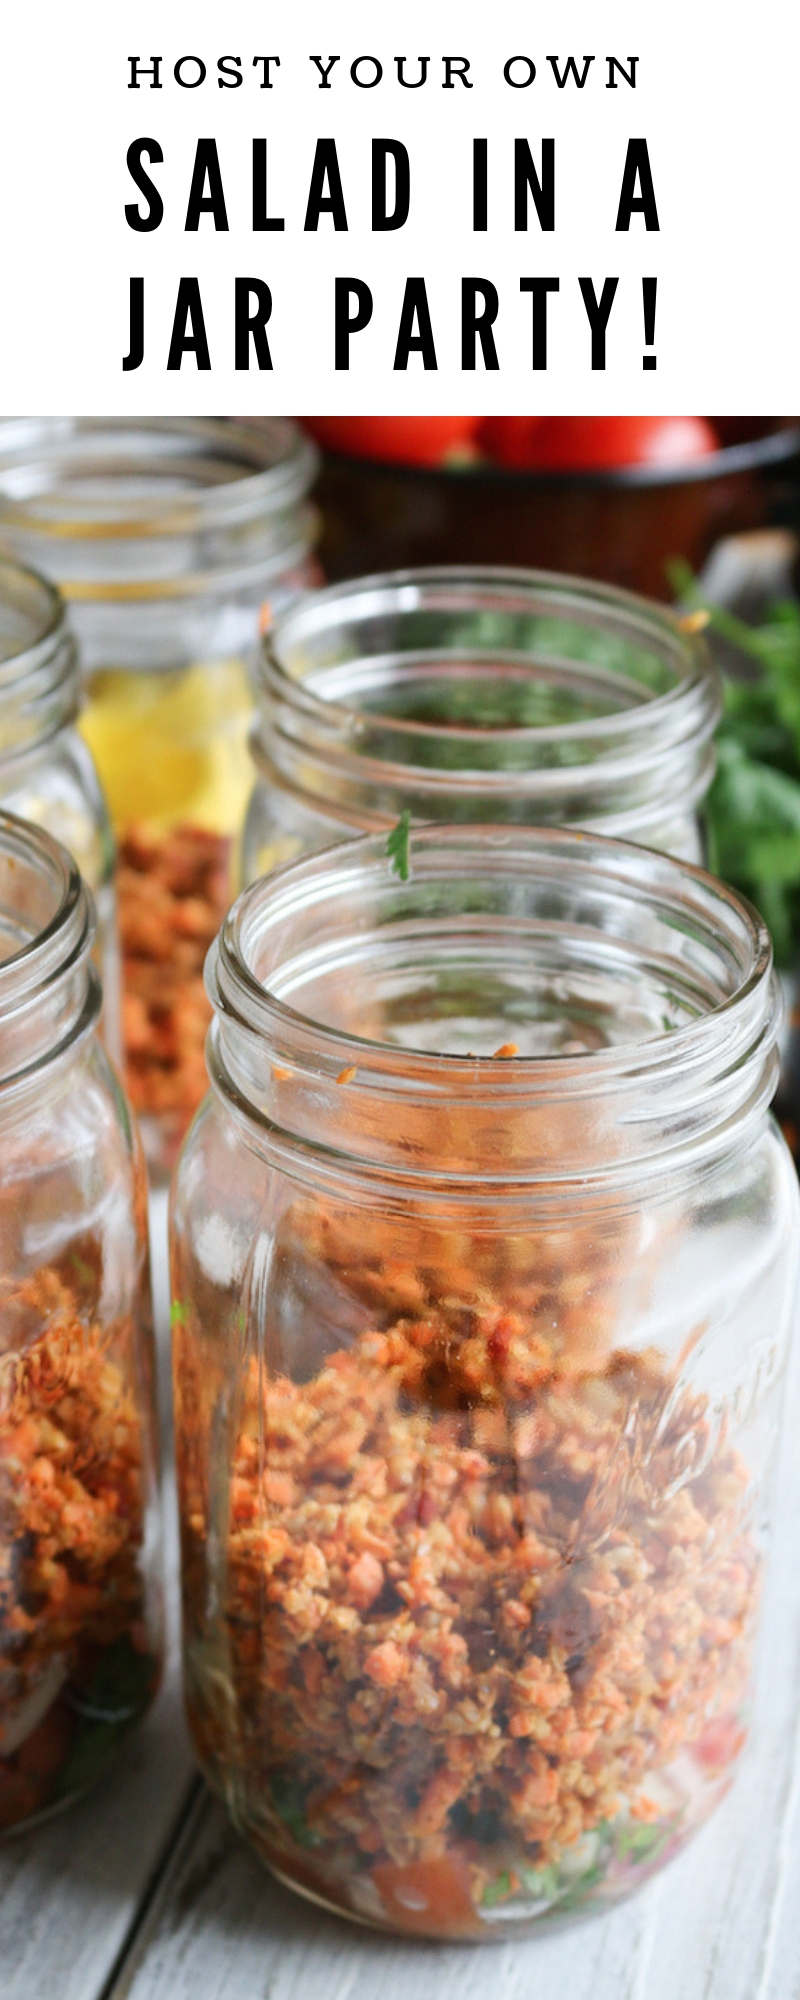 Salad In A Jar Party! | www.livesimplynatural.com